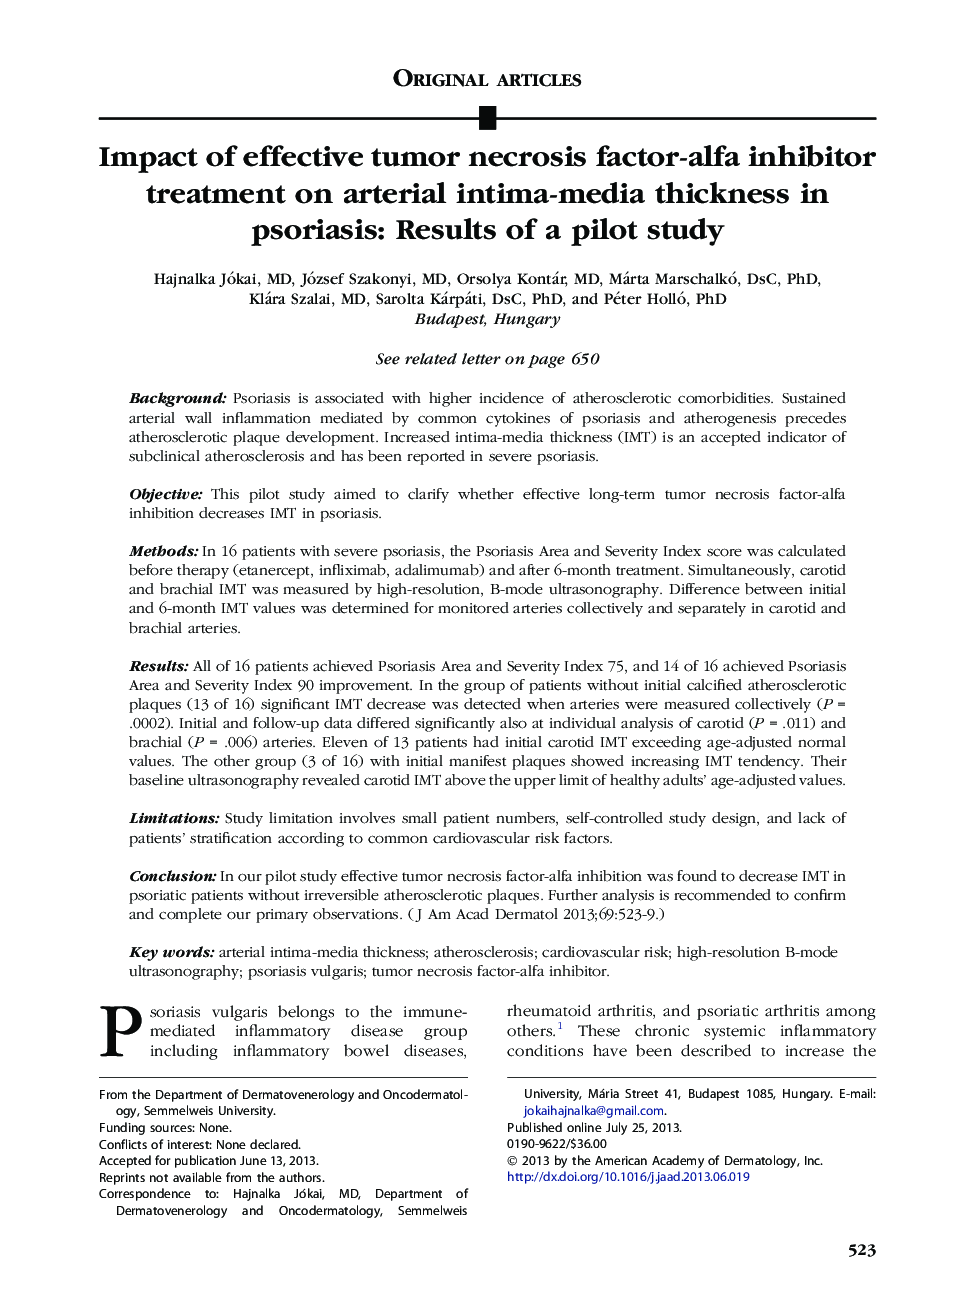 Impact of effective tumor necrosis factor-alfa inhibitor treatment on arterial intima-media thickness in psoriasis: Results of a pilot study 